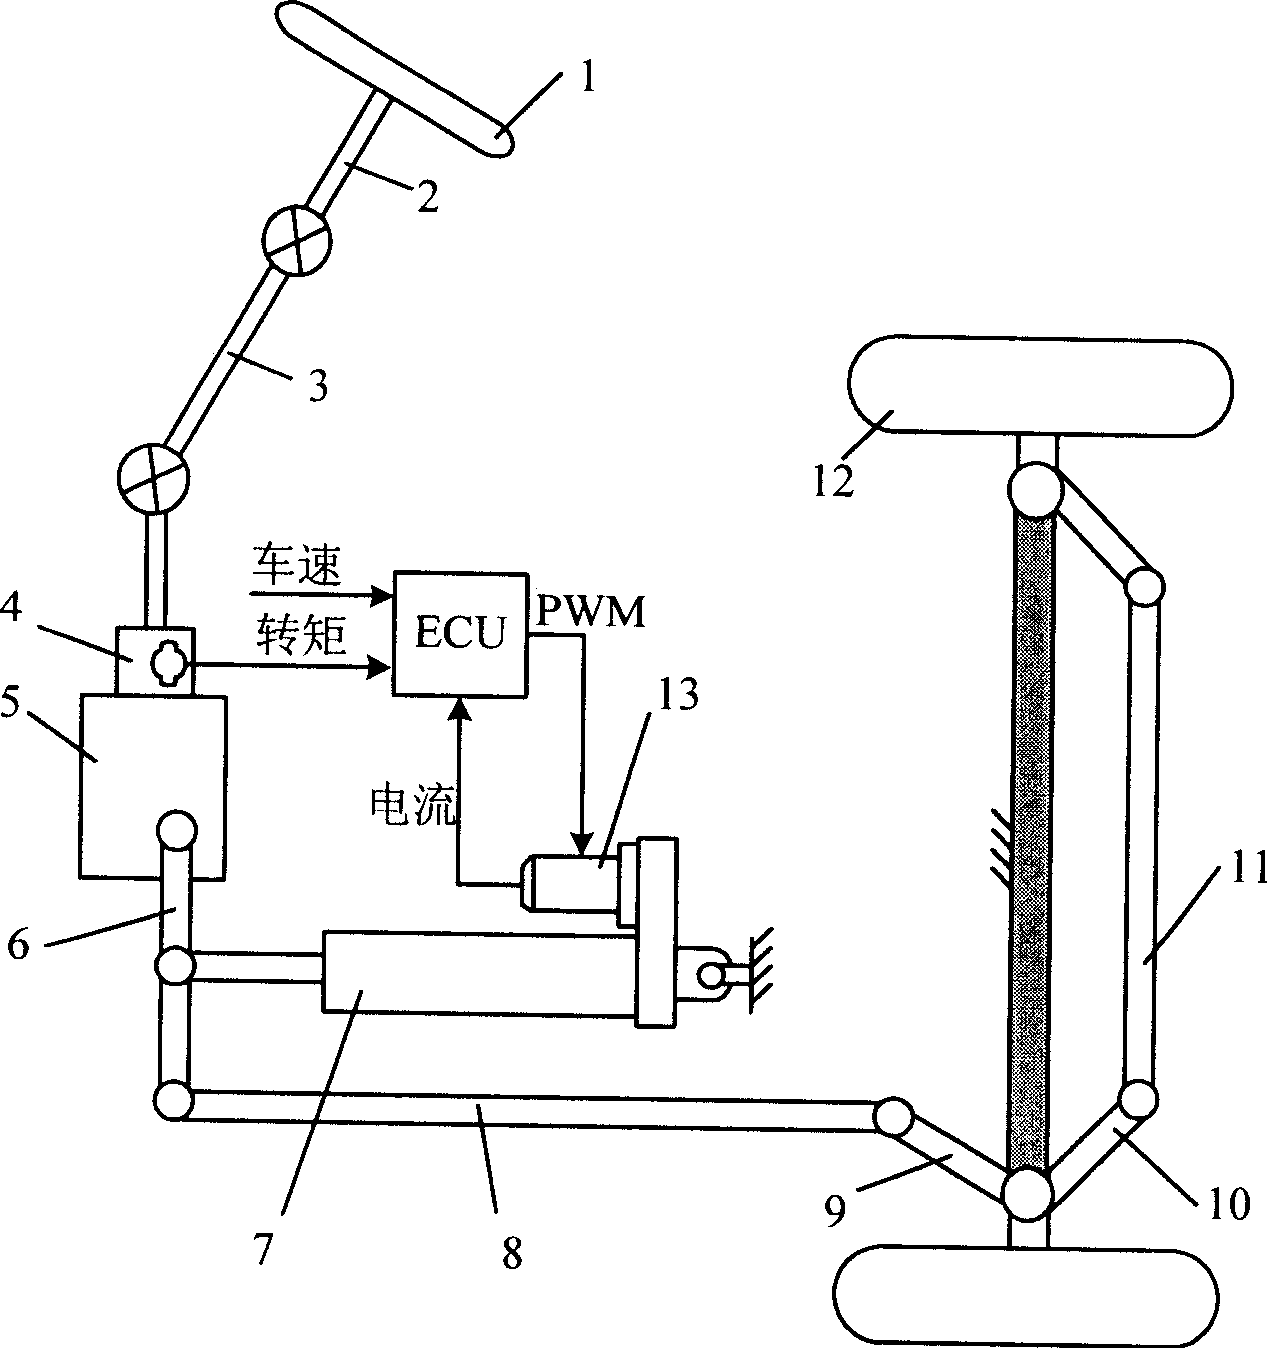 Motor push rod type power-assisted steering apparatus